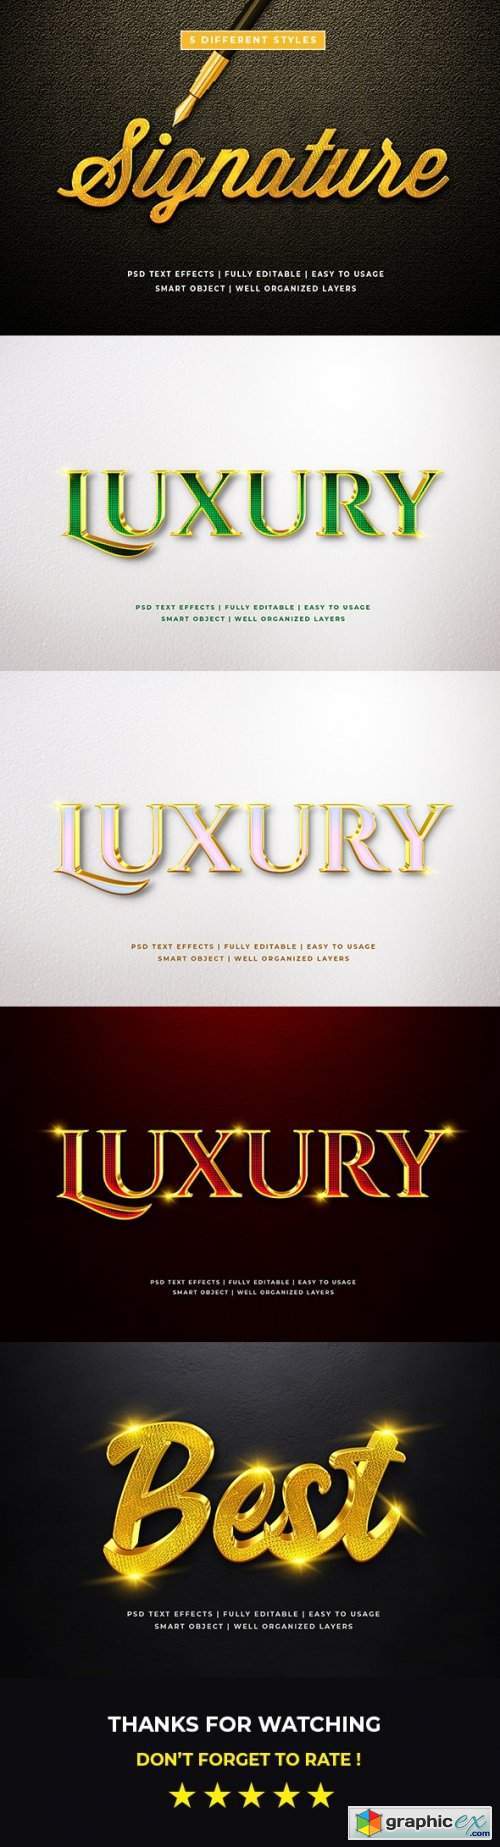 3d Luxury Text Style Effect Mockup